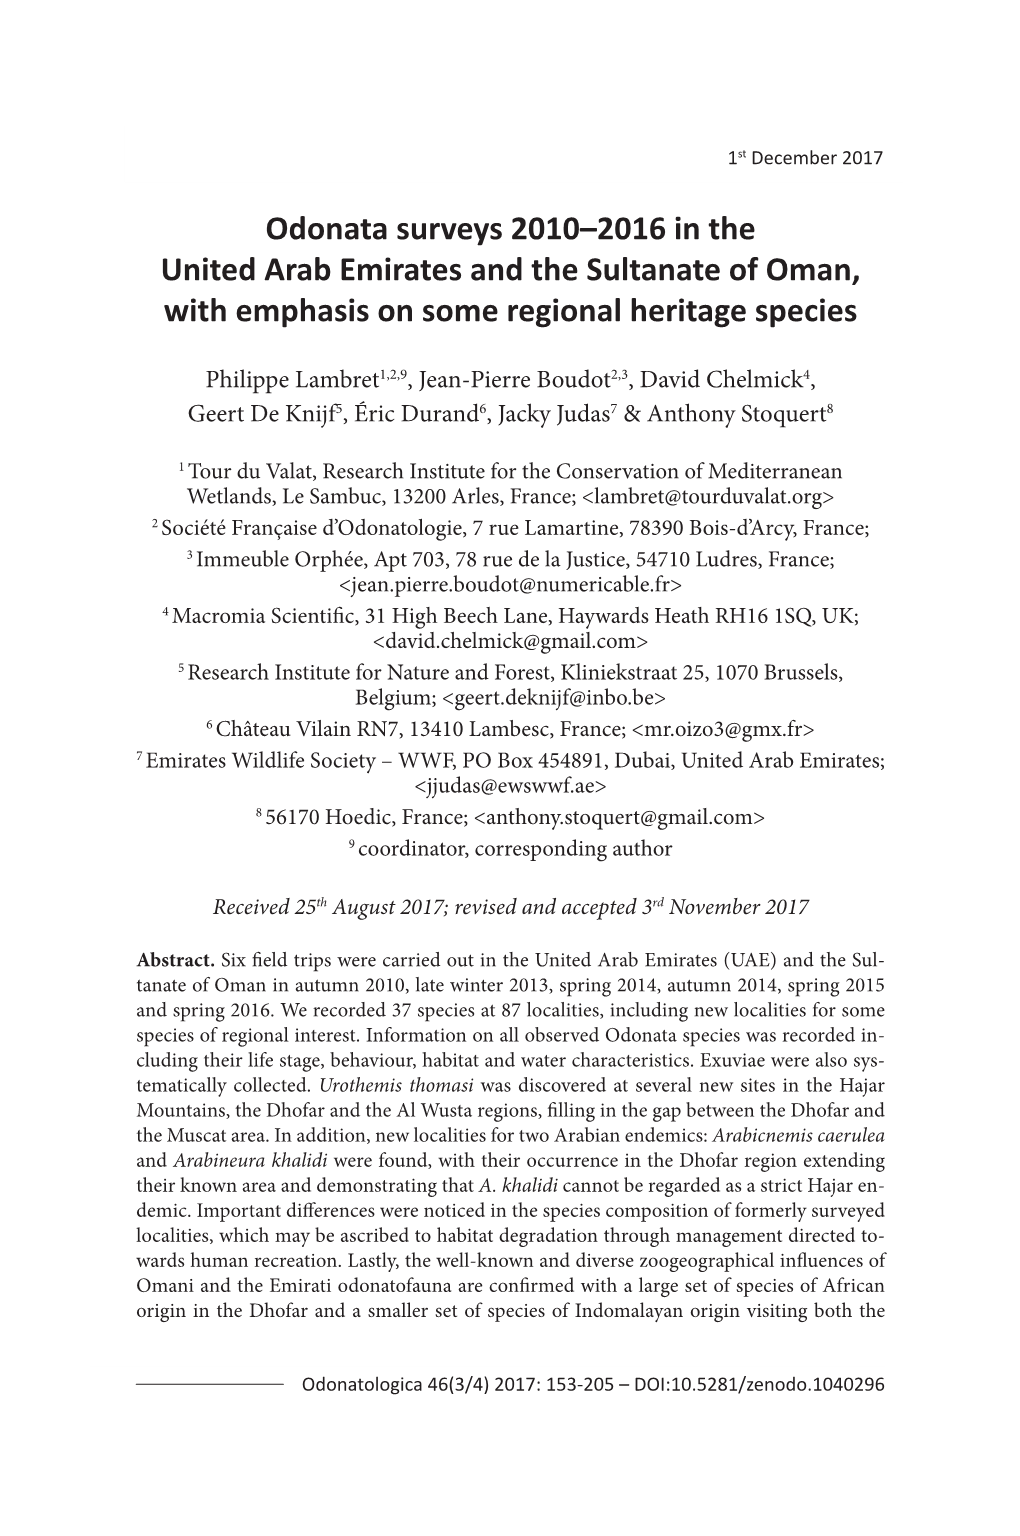 Odonata Surveys 2010–2016 in the United Arab Emirates and the Sultanate of Oman, with Emphasis on Some Regional Heritage Species